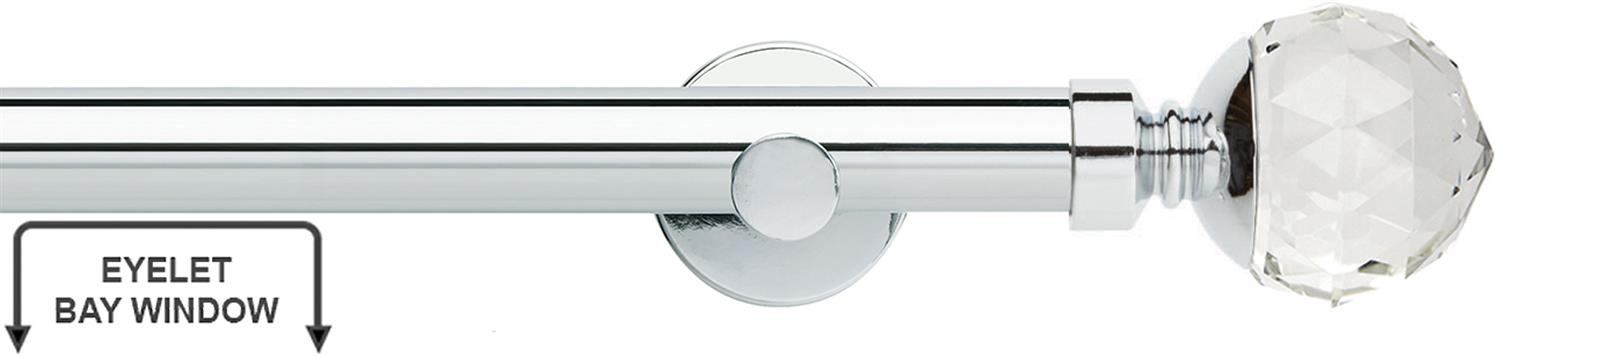 Neo Premium 28mm Eyelet Bay Window Pole Chrome Clear Faceted Ball